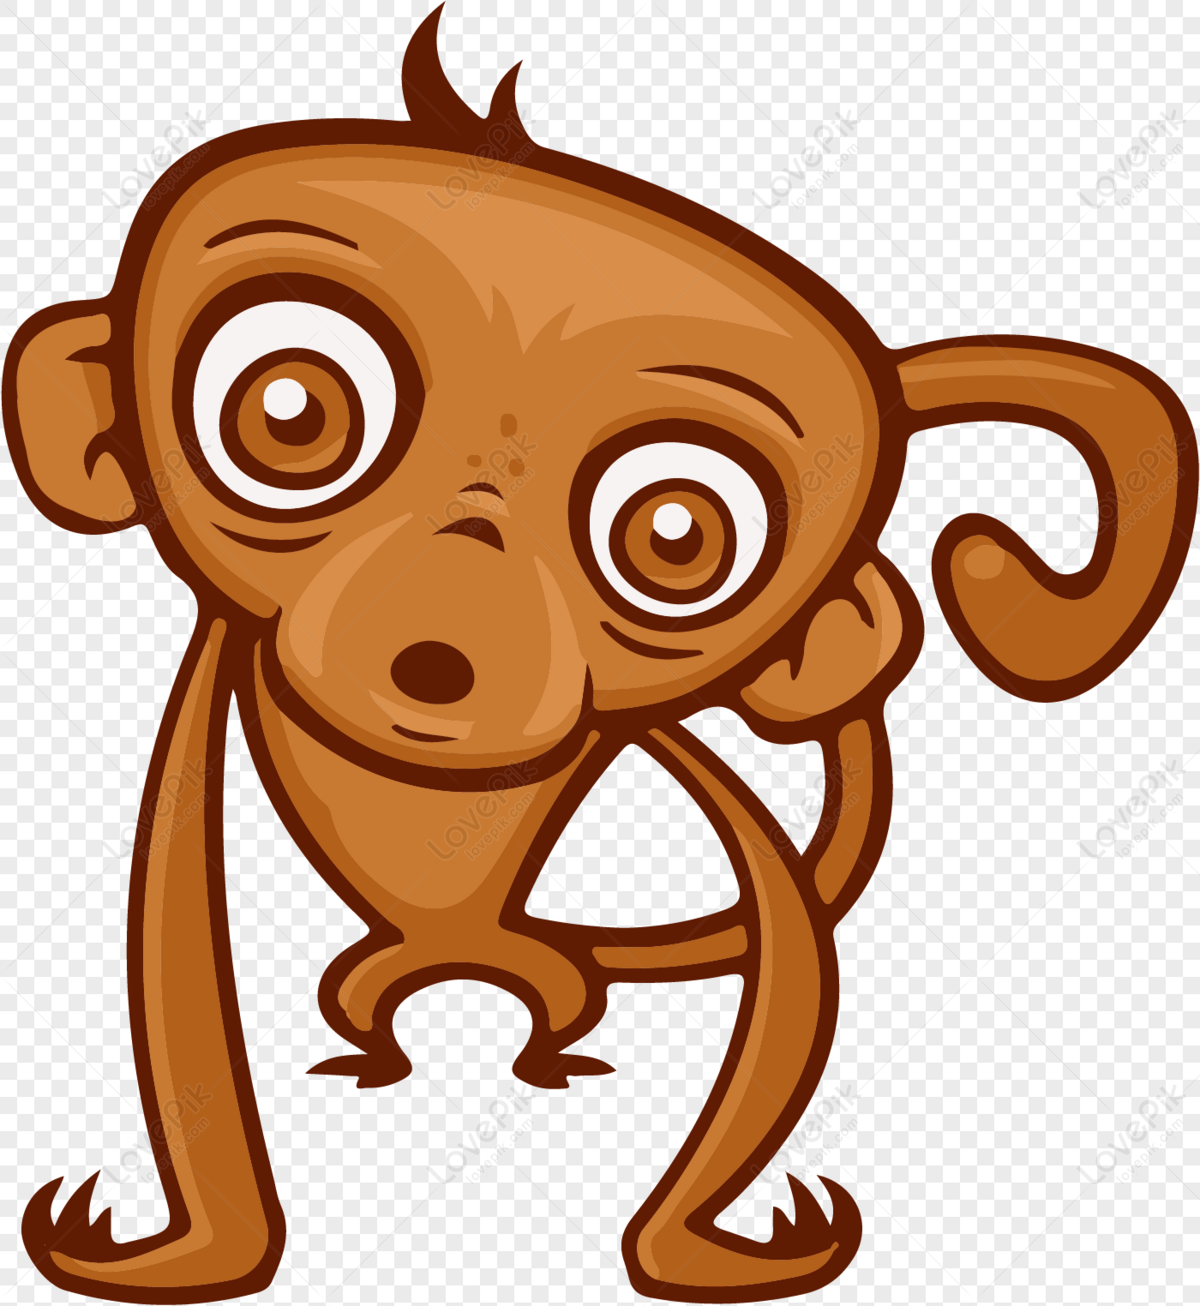 Cartoon Monkey PNG Transparent Image And Clipart Image For Free Download -  Lovepik | 400641347